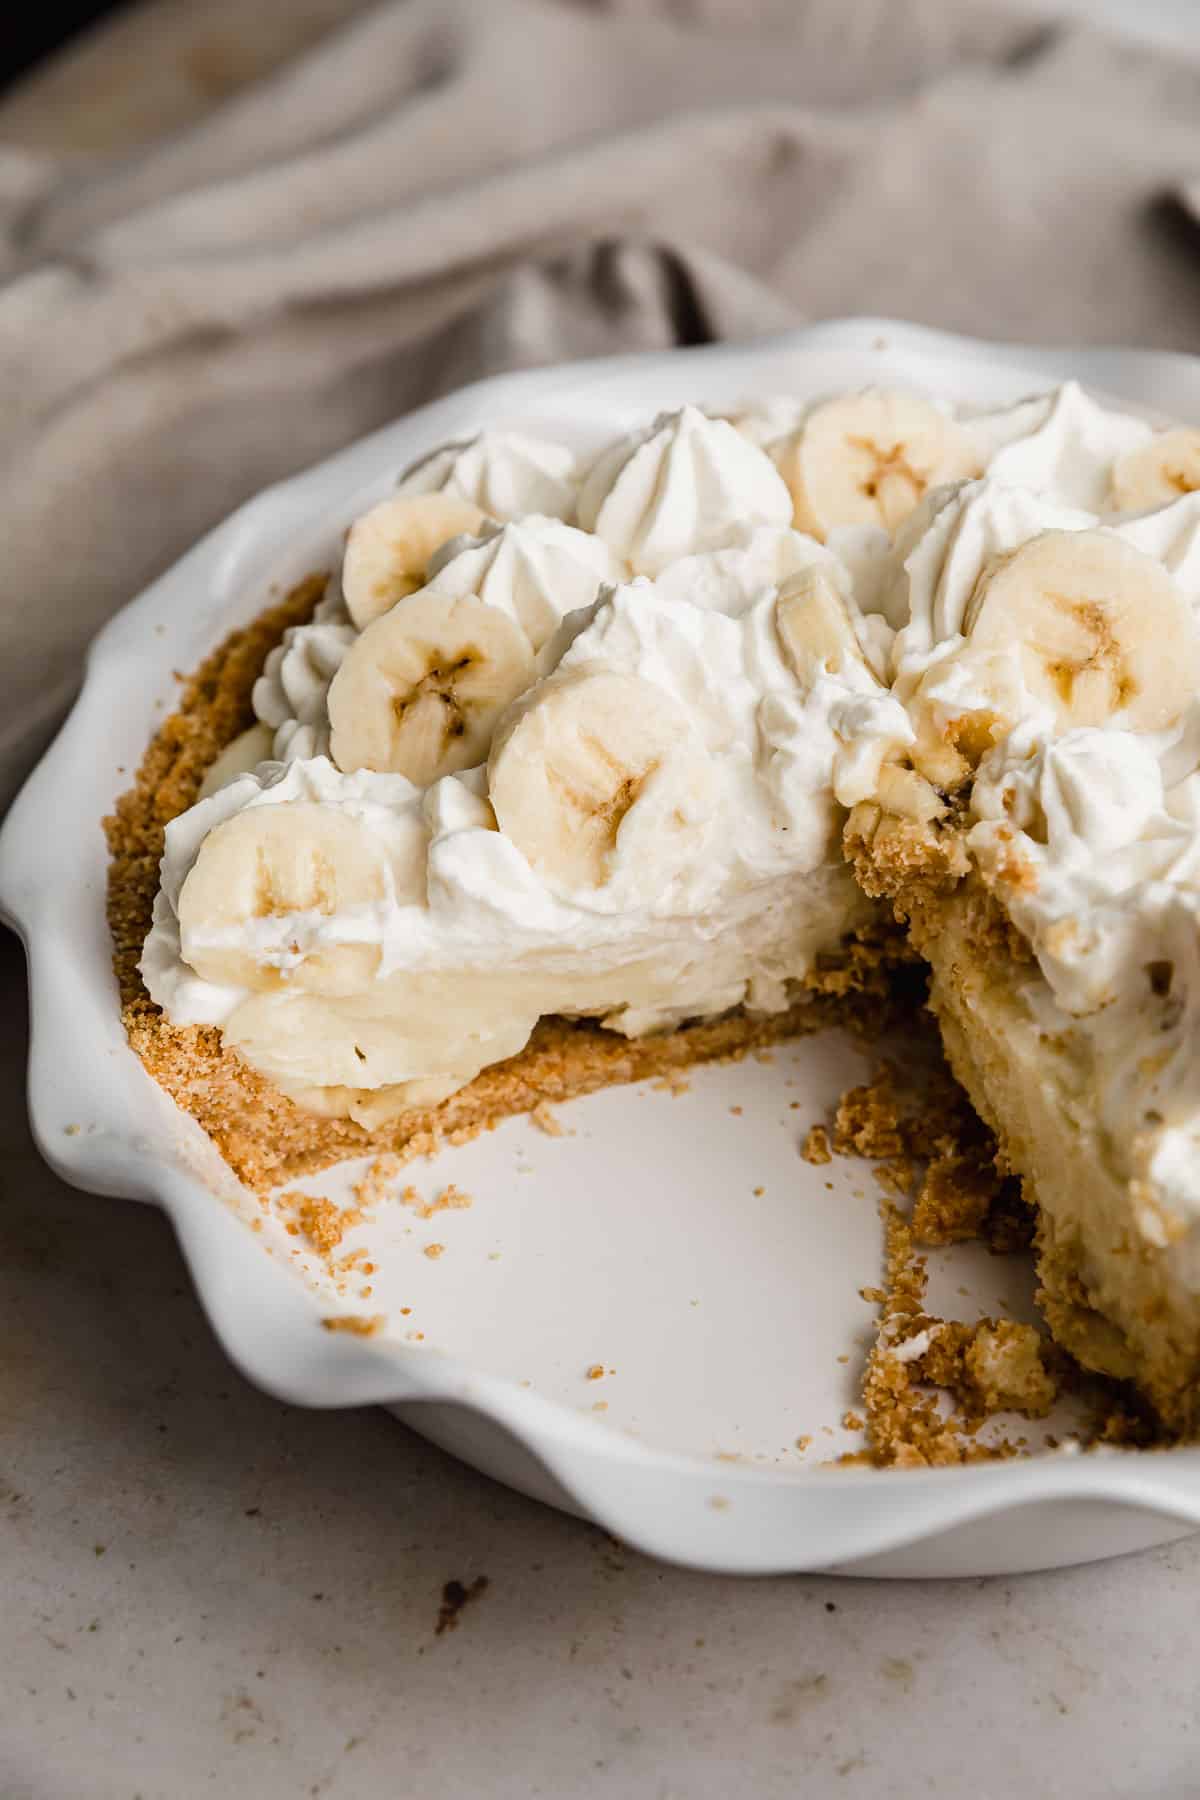 A banana cream pie in a white pie plate with a slice removed from the pie showing the sliced bananas underneath the custard.